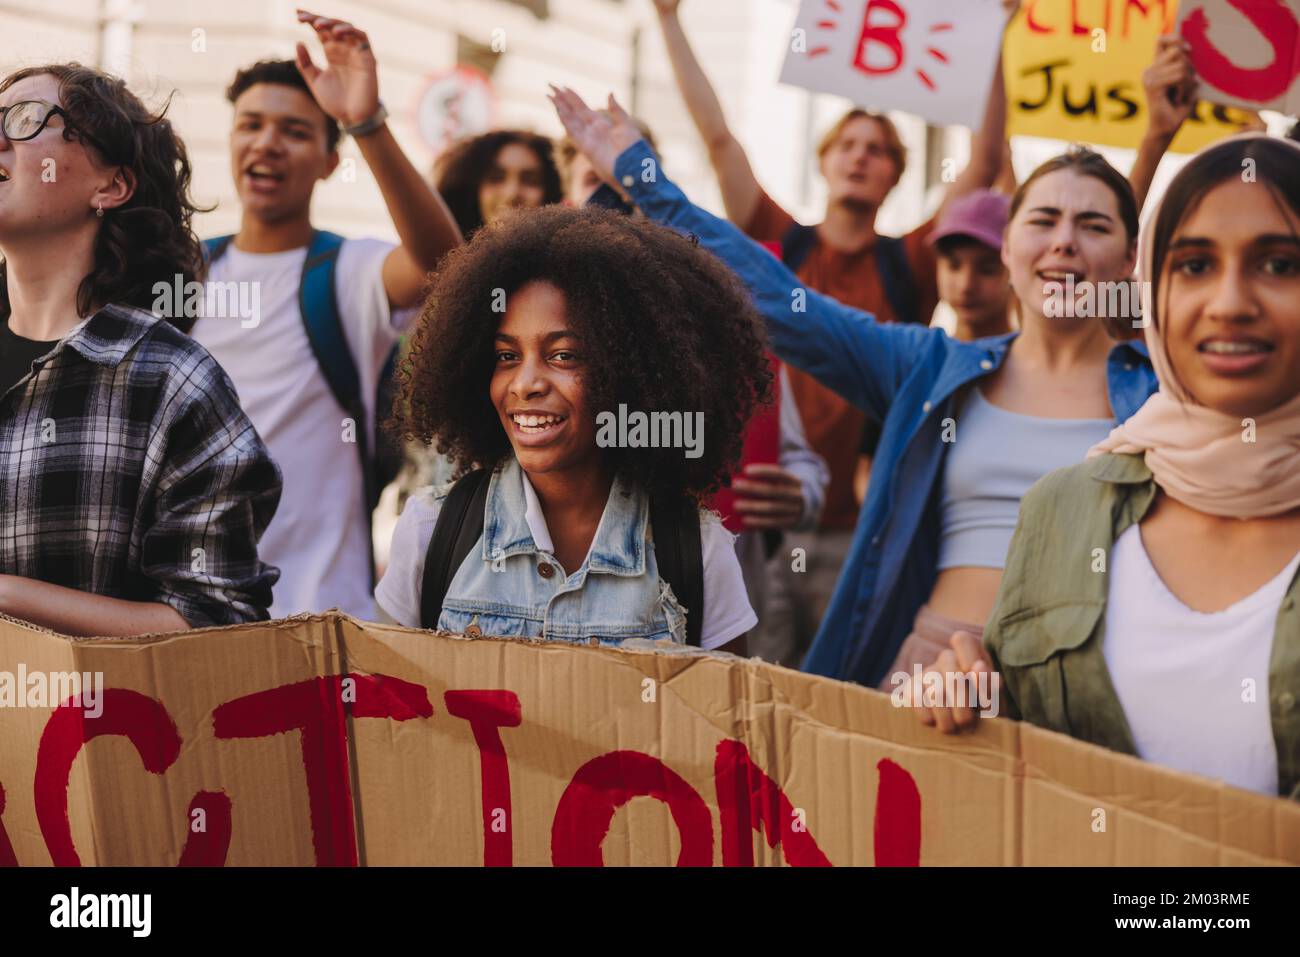 Generation Z climate activism. Young people holding a banner while marching against climate change. Multicultural youth activists campaigning for clim Stock Photo